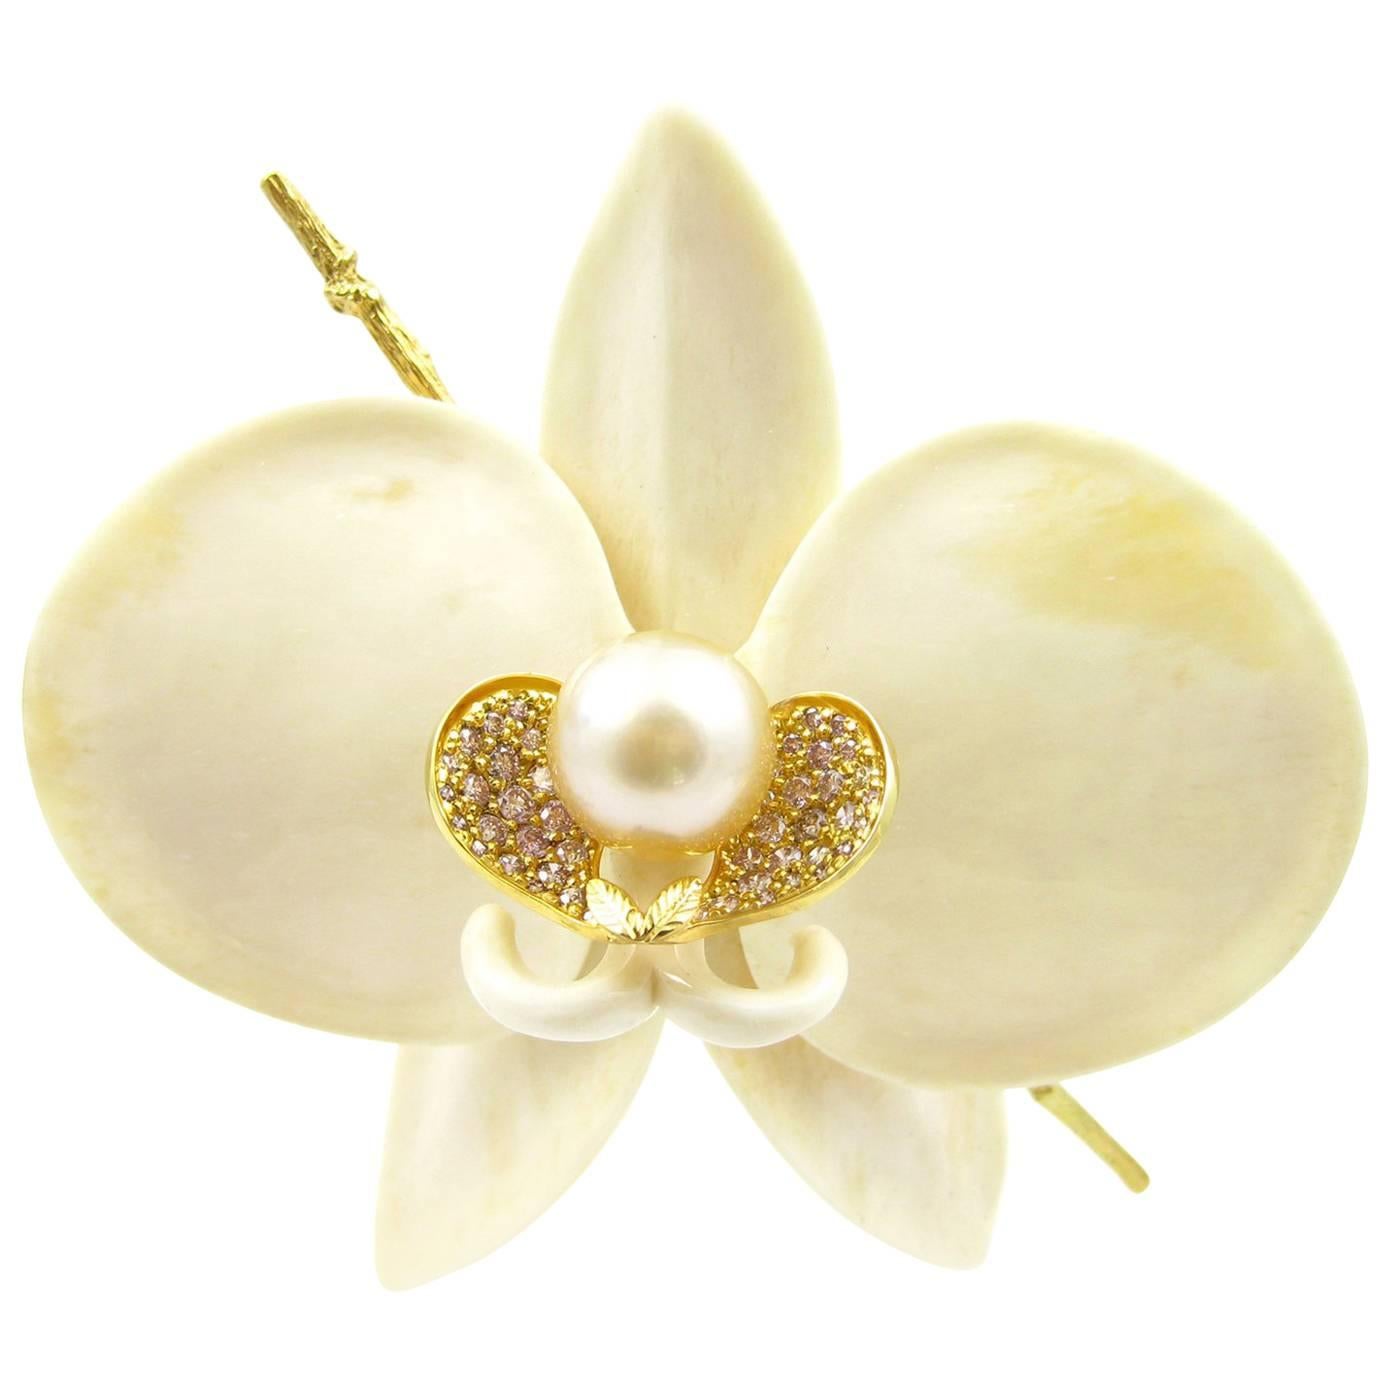 K. Brunini 18K Gold Orchid Brooch in Carved Bone, Diamonds and South Sea Pearl 